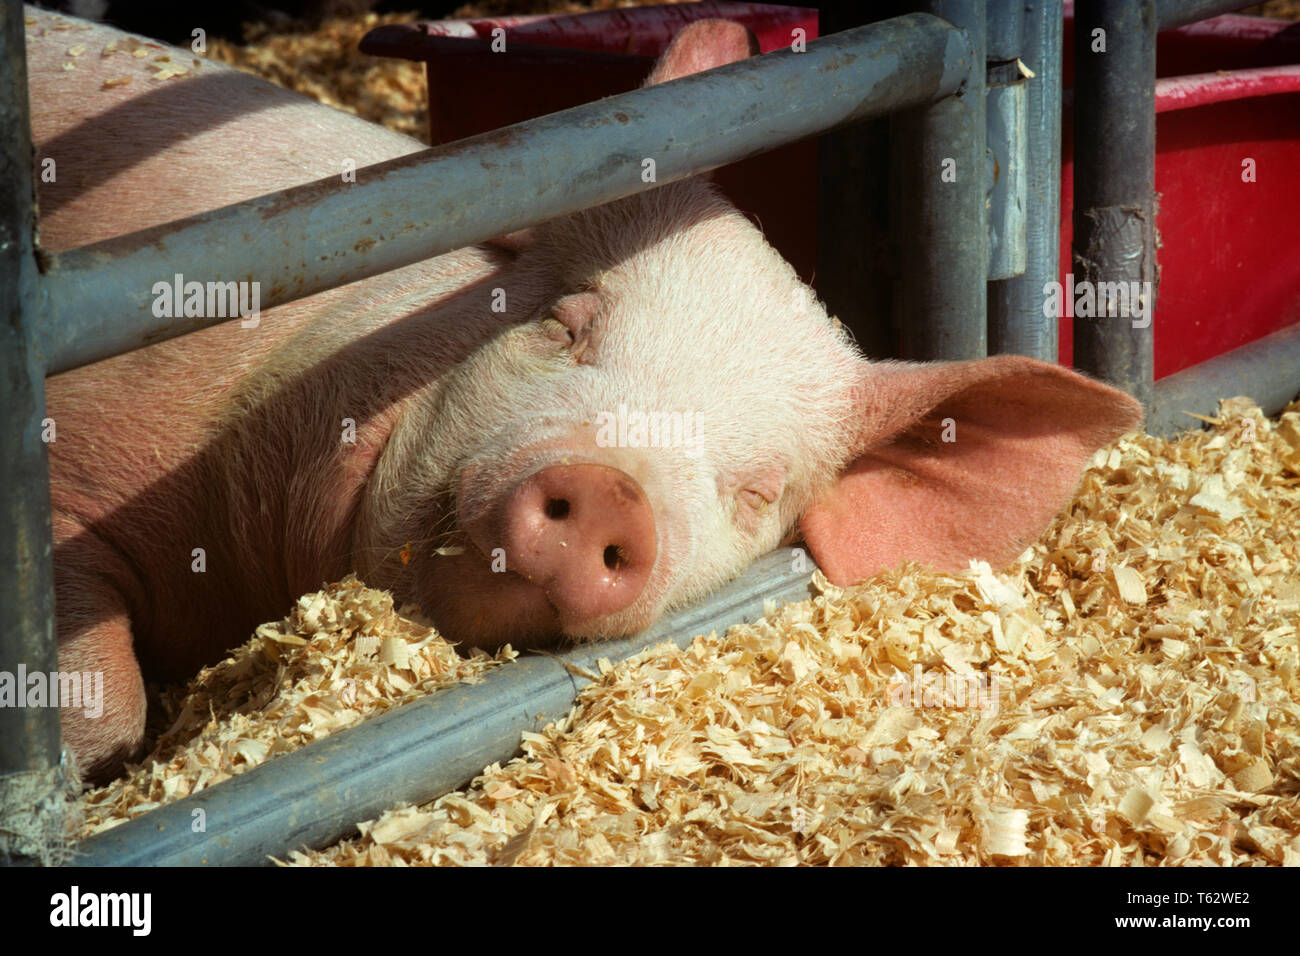 1990s PIG AT COUNTY FAIR SLEEPING WITH HEAD ON METAL FENCE BAR CLOSE-UP - kf36549 LGA001 HARS RELAXED AT COUNTY FAIR ON POLITICS PORK CONCEPTUAL CLOSE-UP NOURISHMENT PIGS FAIRS FENCES HOGS MAMMAL RELAXATION BRUIN OBLIVIOUS OLD FASHIONED URSINE Stock Photo